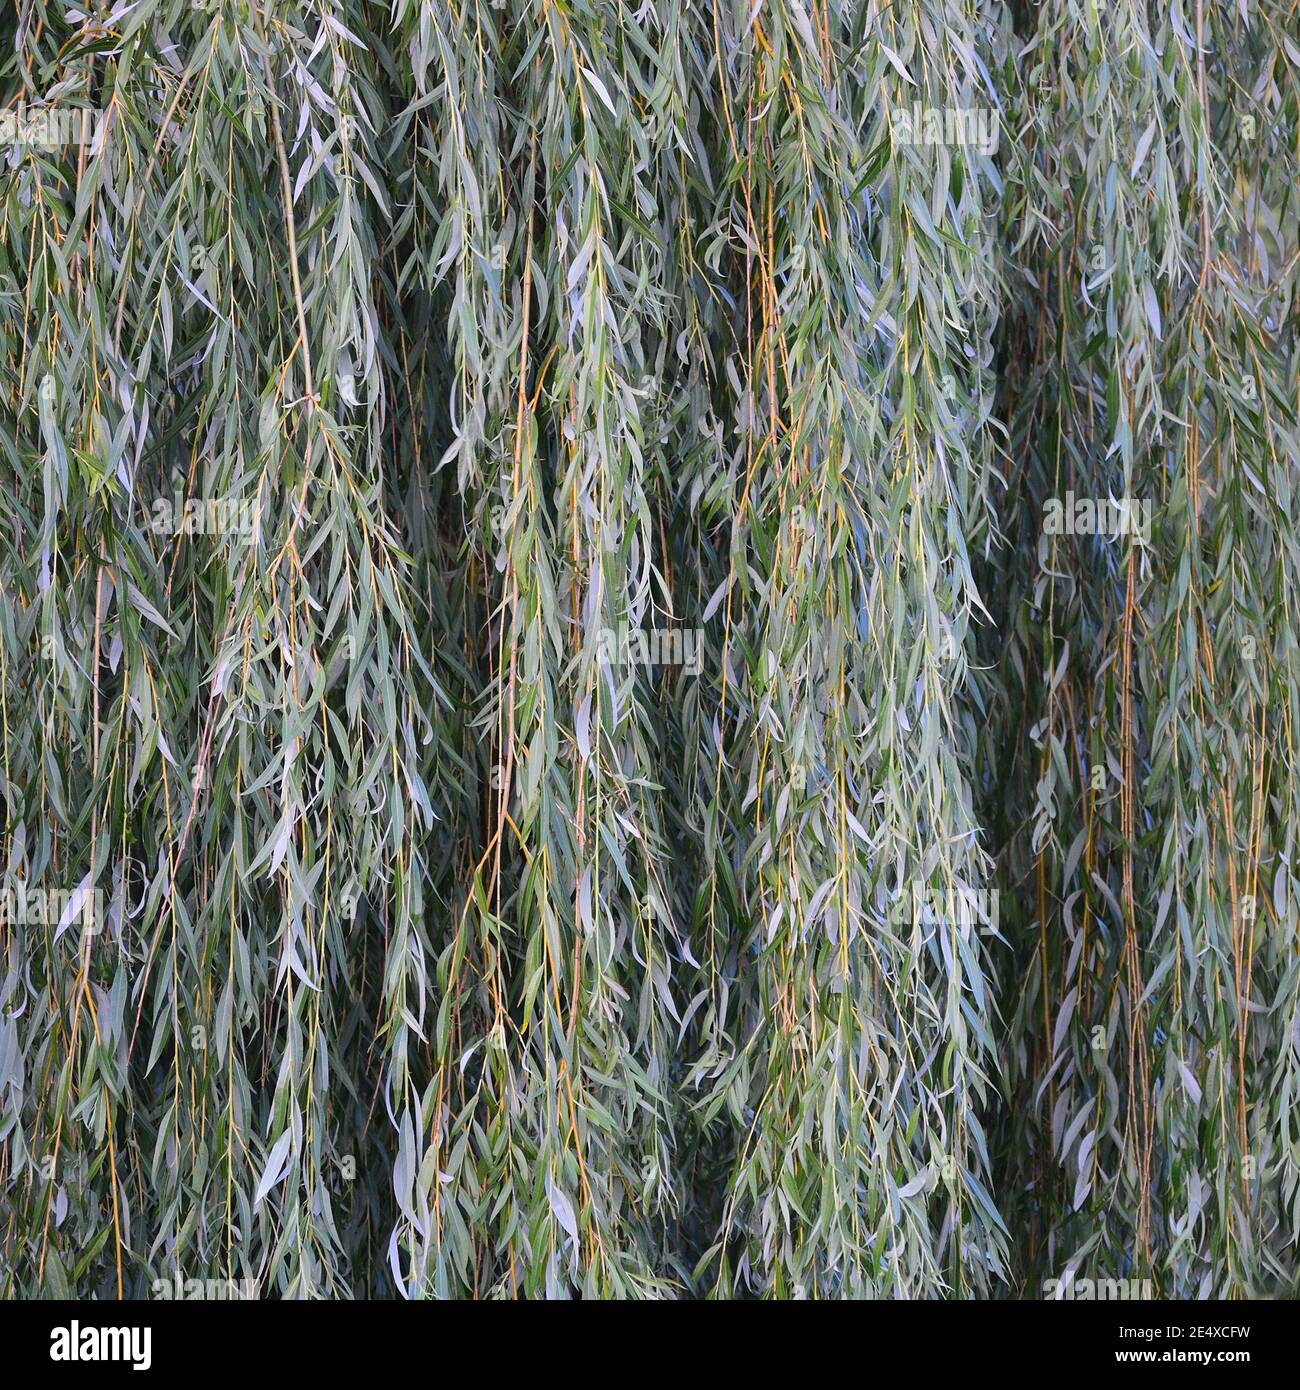 White willow tree (salix alba) branches, large detailed vertical textured foliage pattern closeup, green branch texture in detail, salicin concept Stock Photo